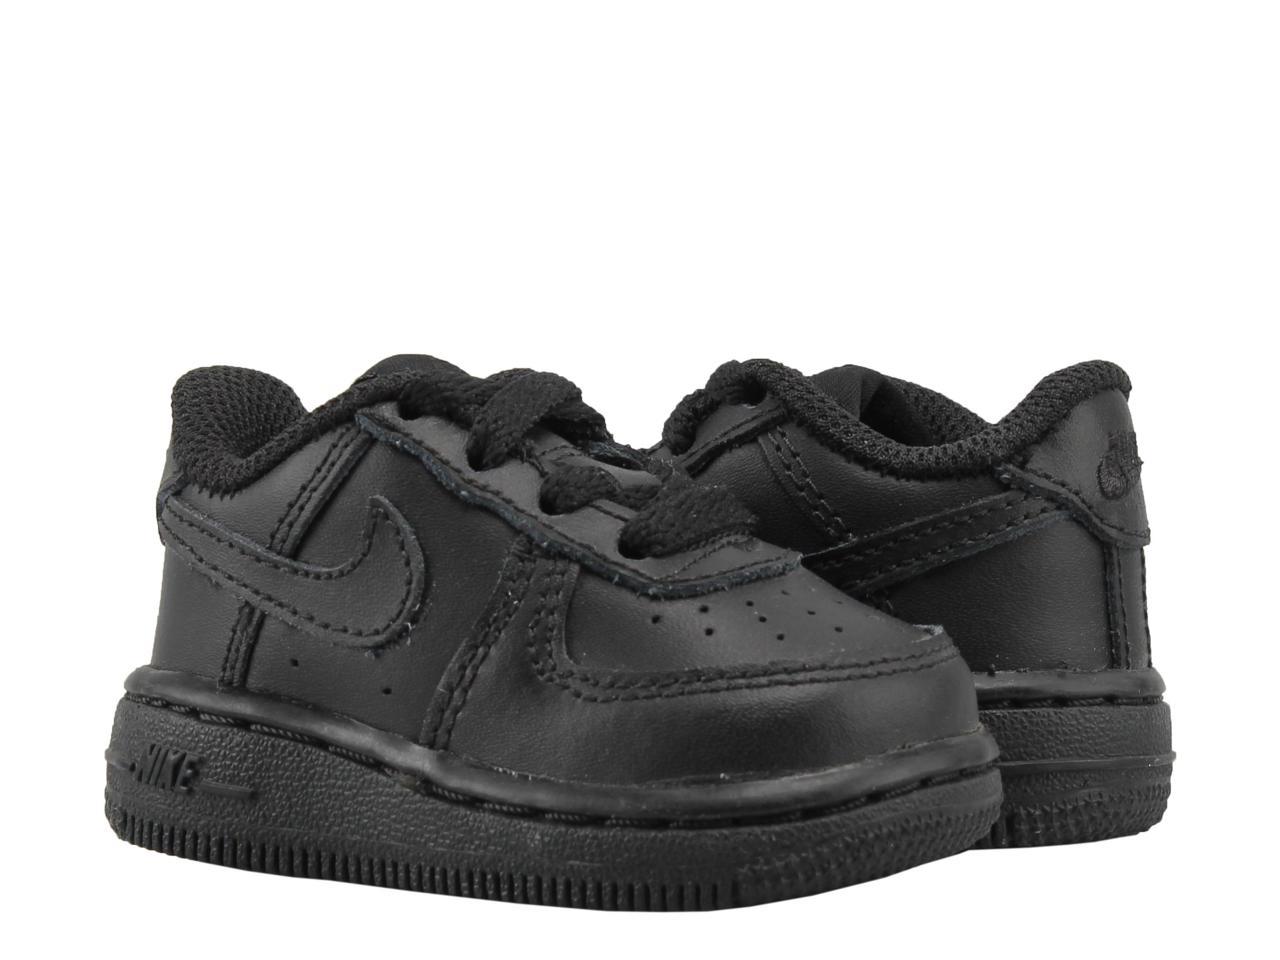 air force ones grade school size 6